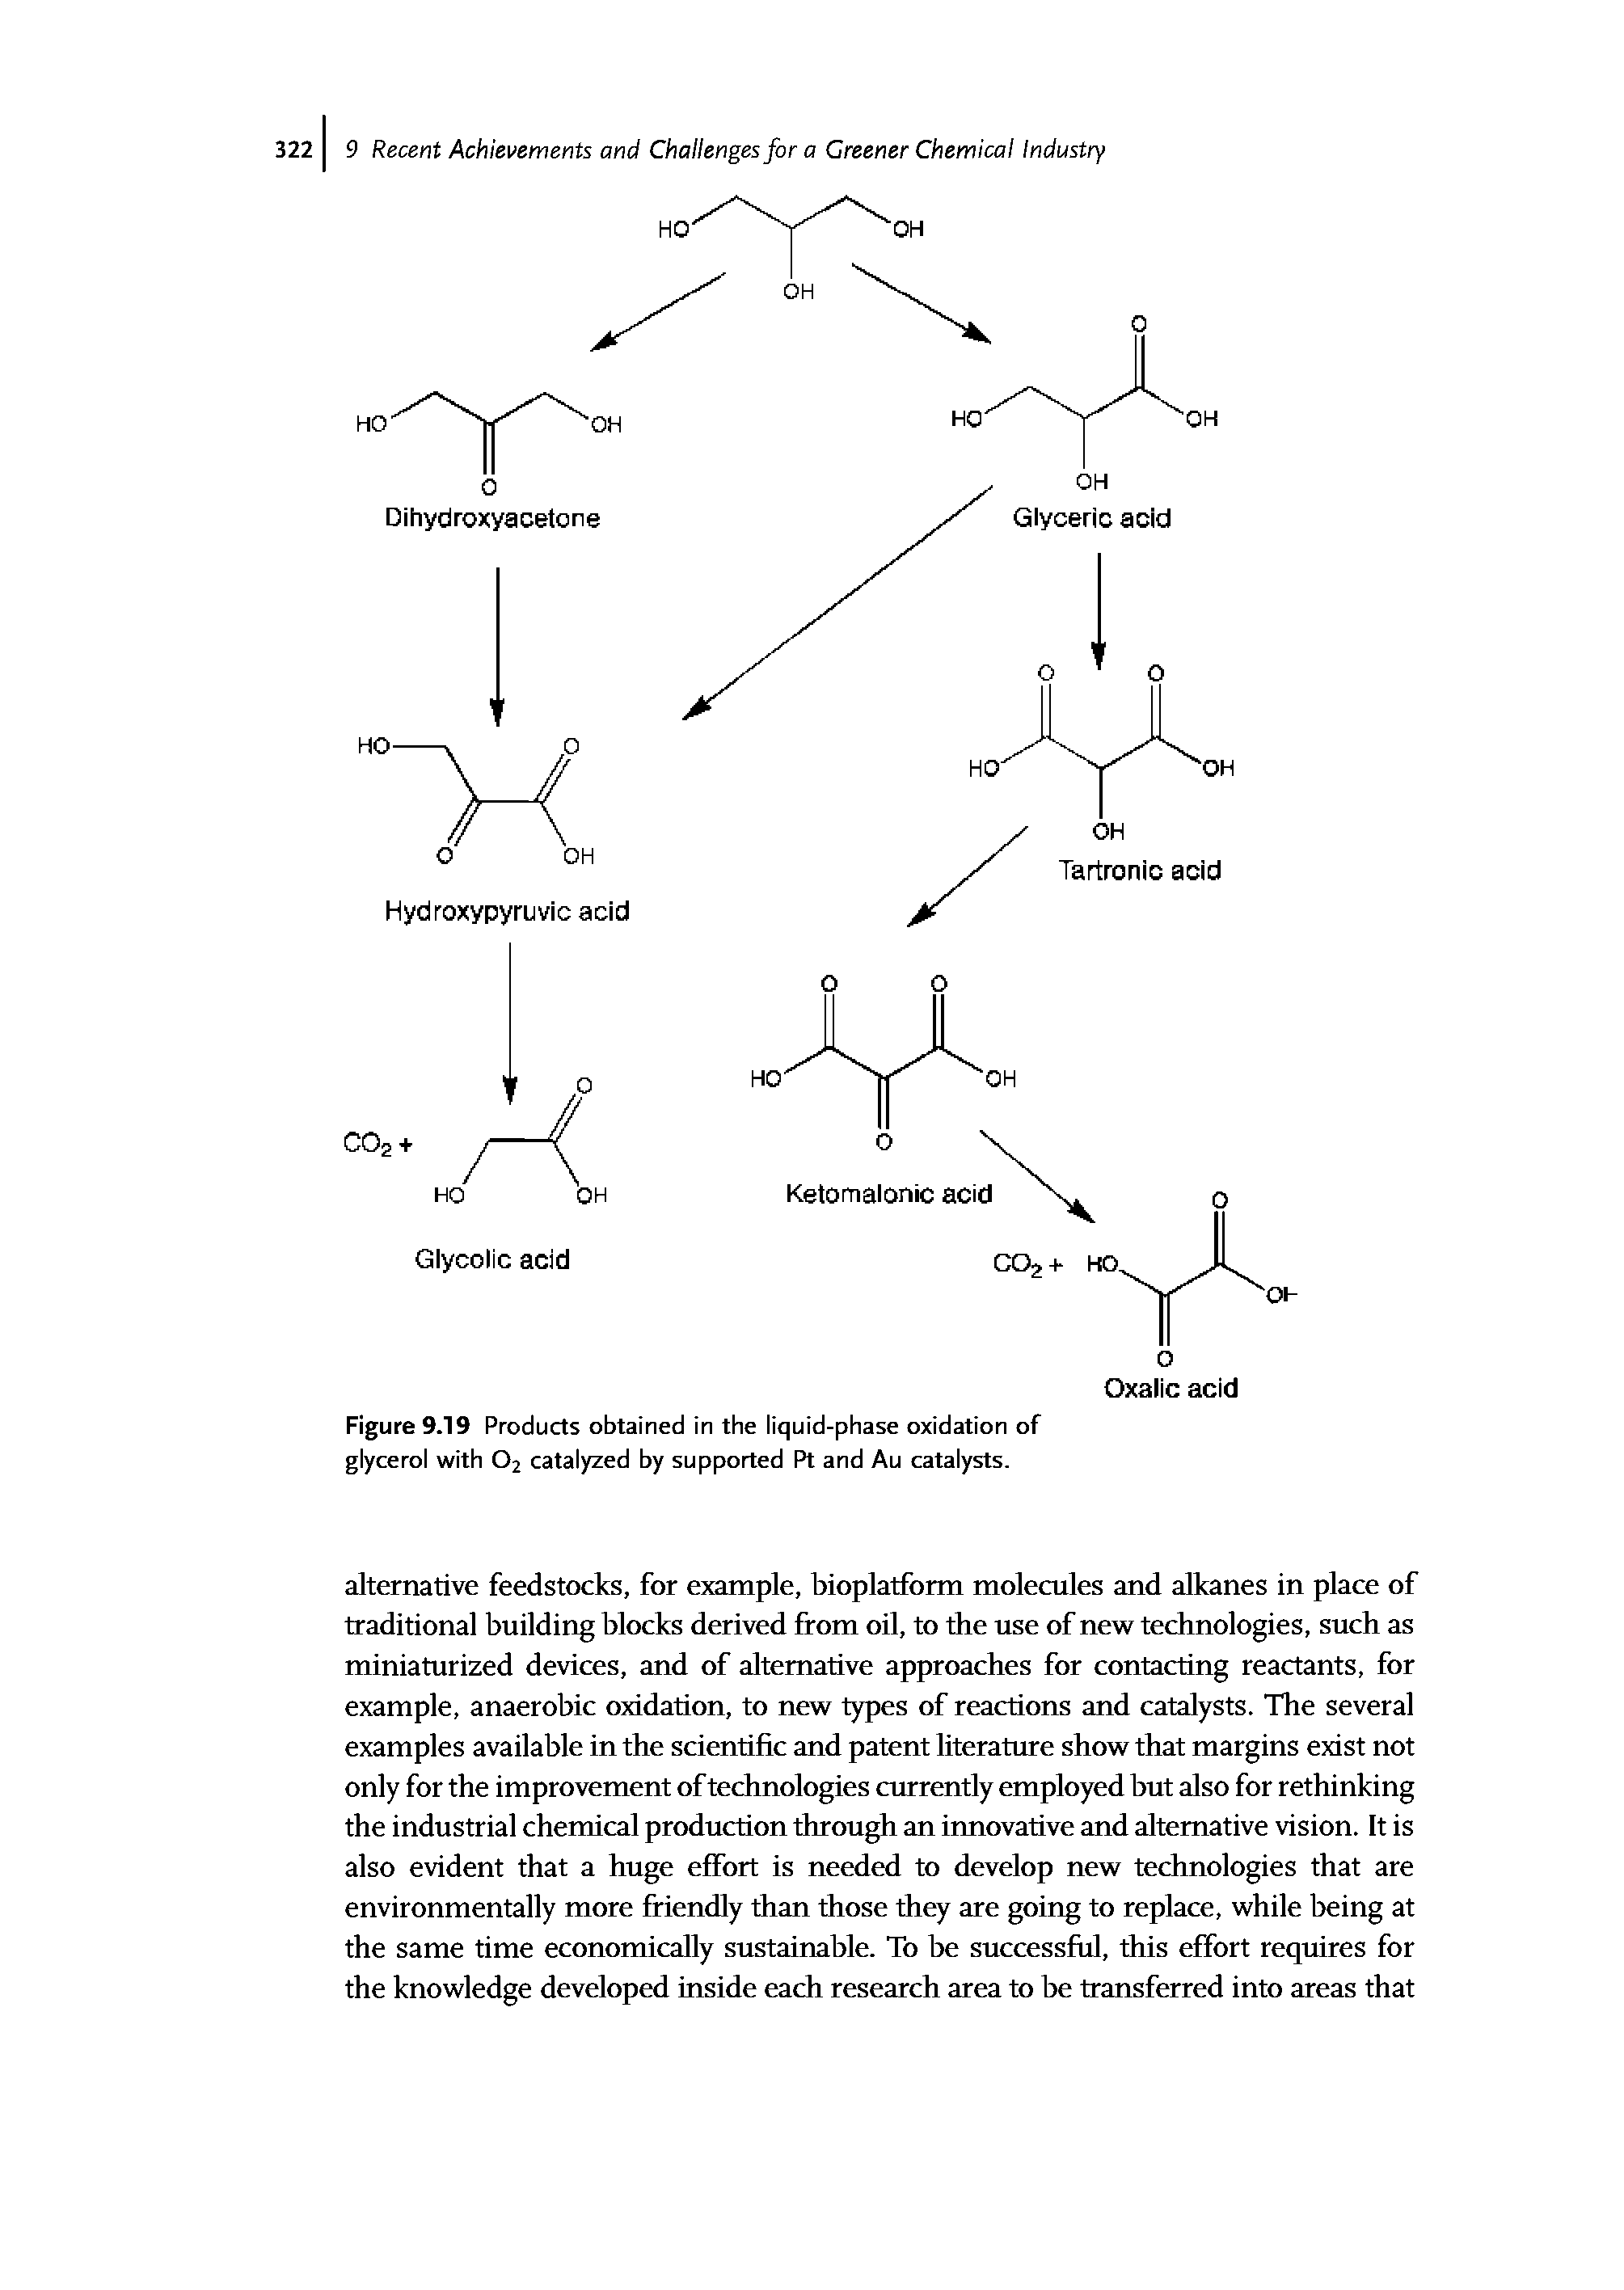 Figure 9.19 Products obtained in the liquid-phase oxidation of glycerol with 02 catalyzed by supported Pt and Au catalysts.